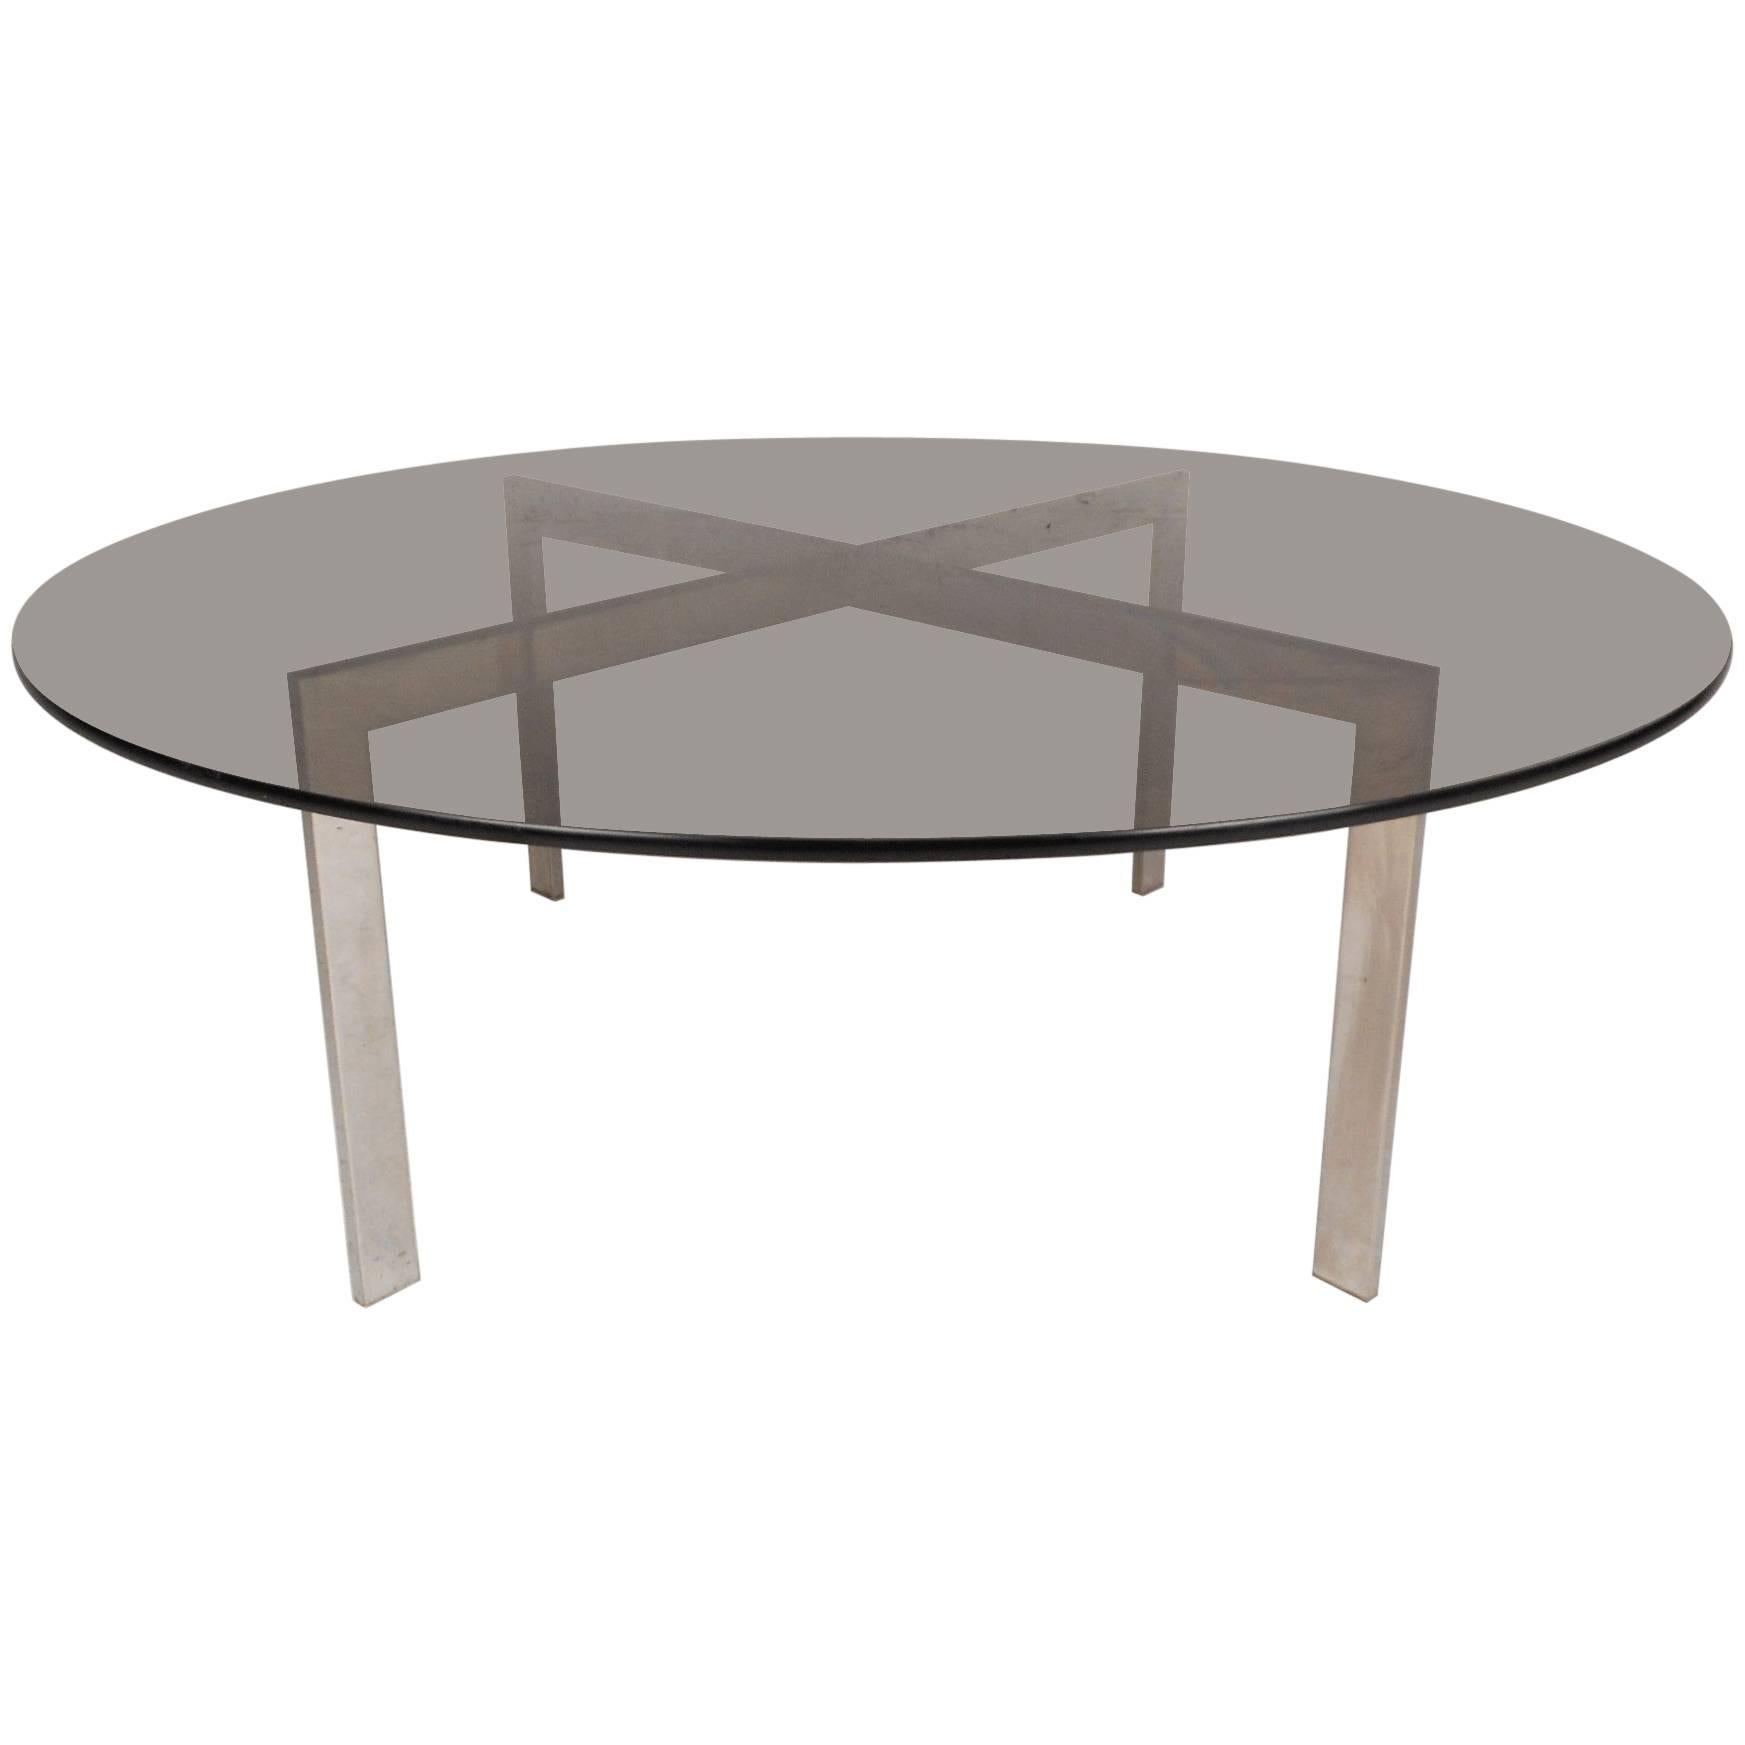 Mid-Century Modern Round Coffee Table with a "X" Shaped Chrome Base